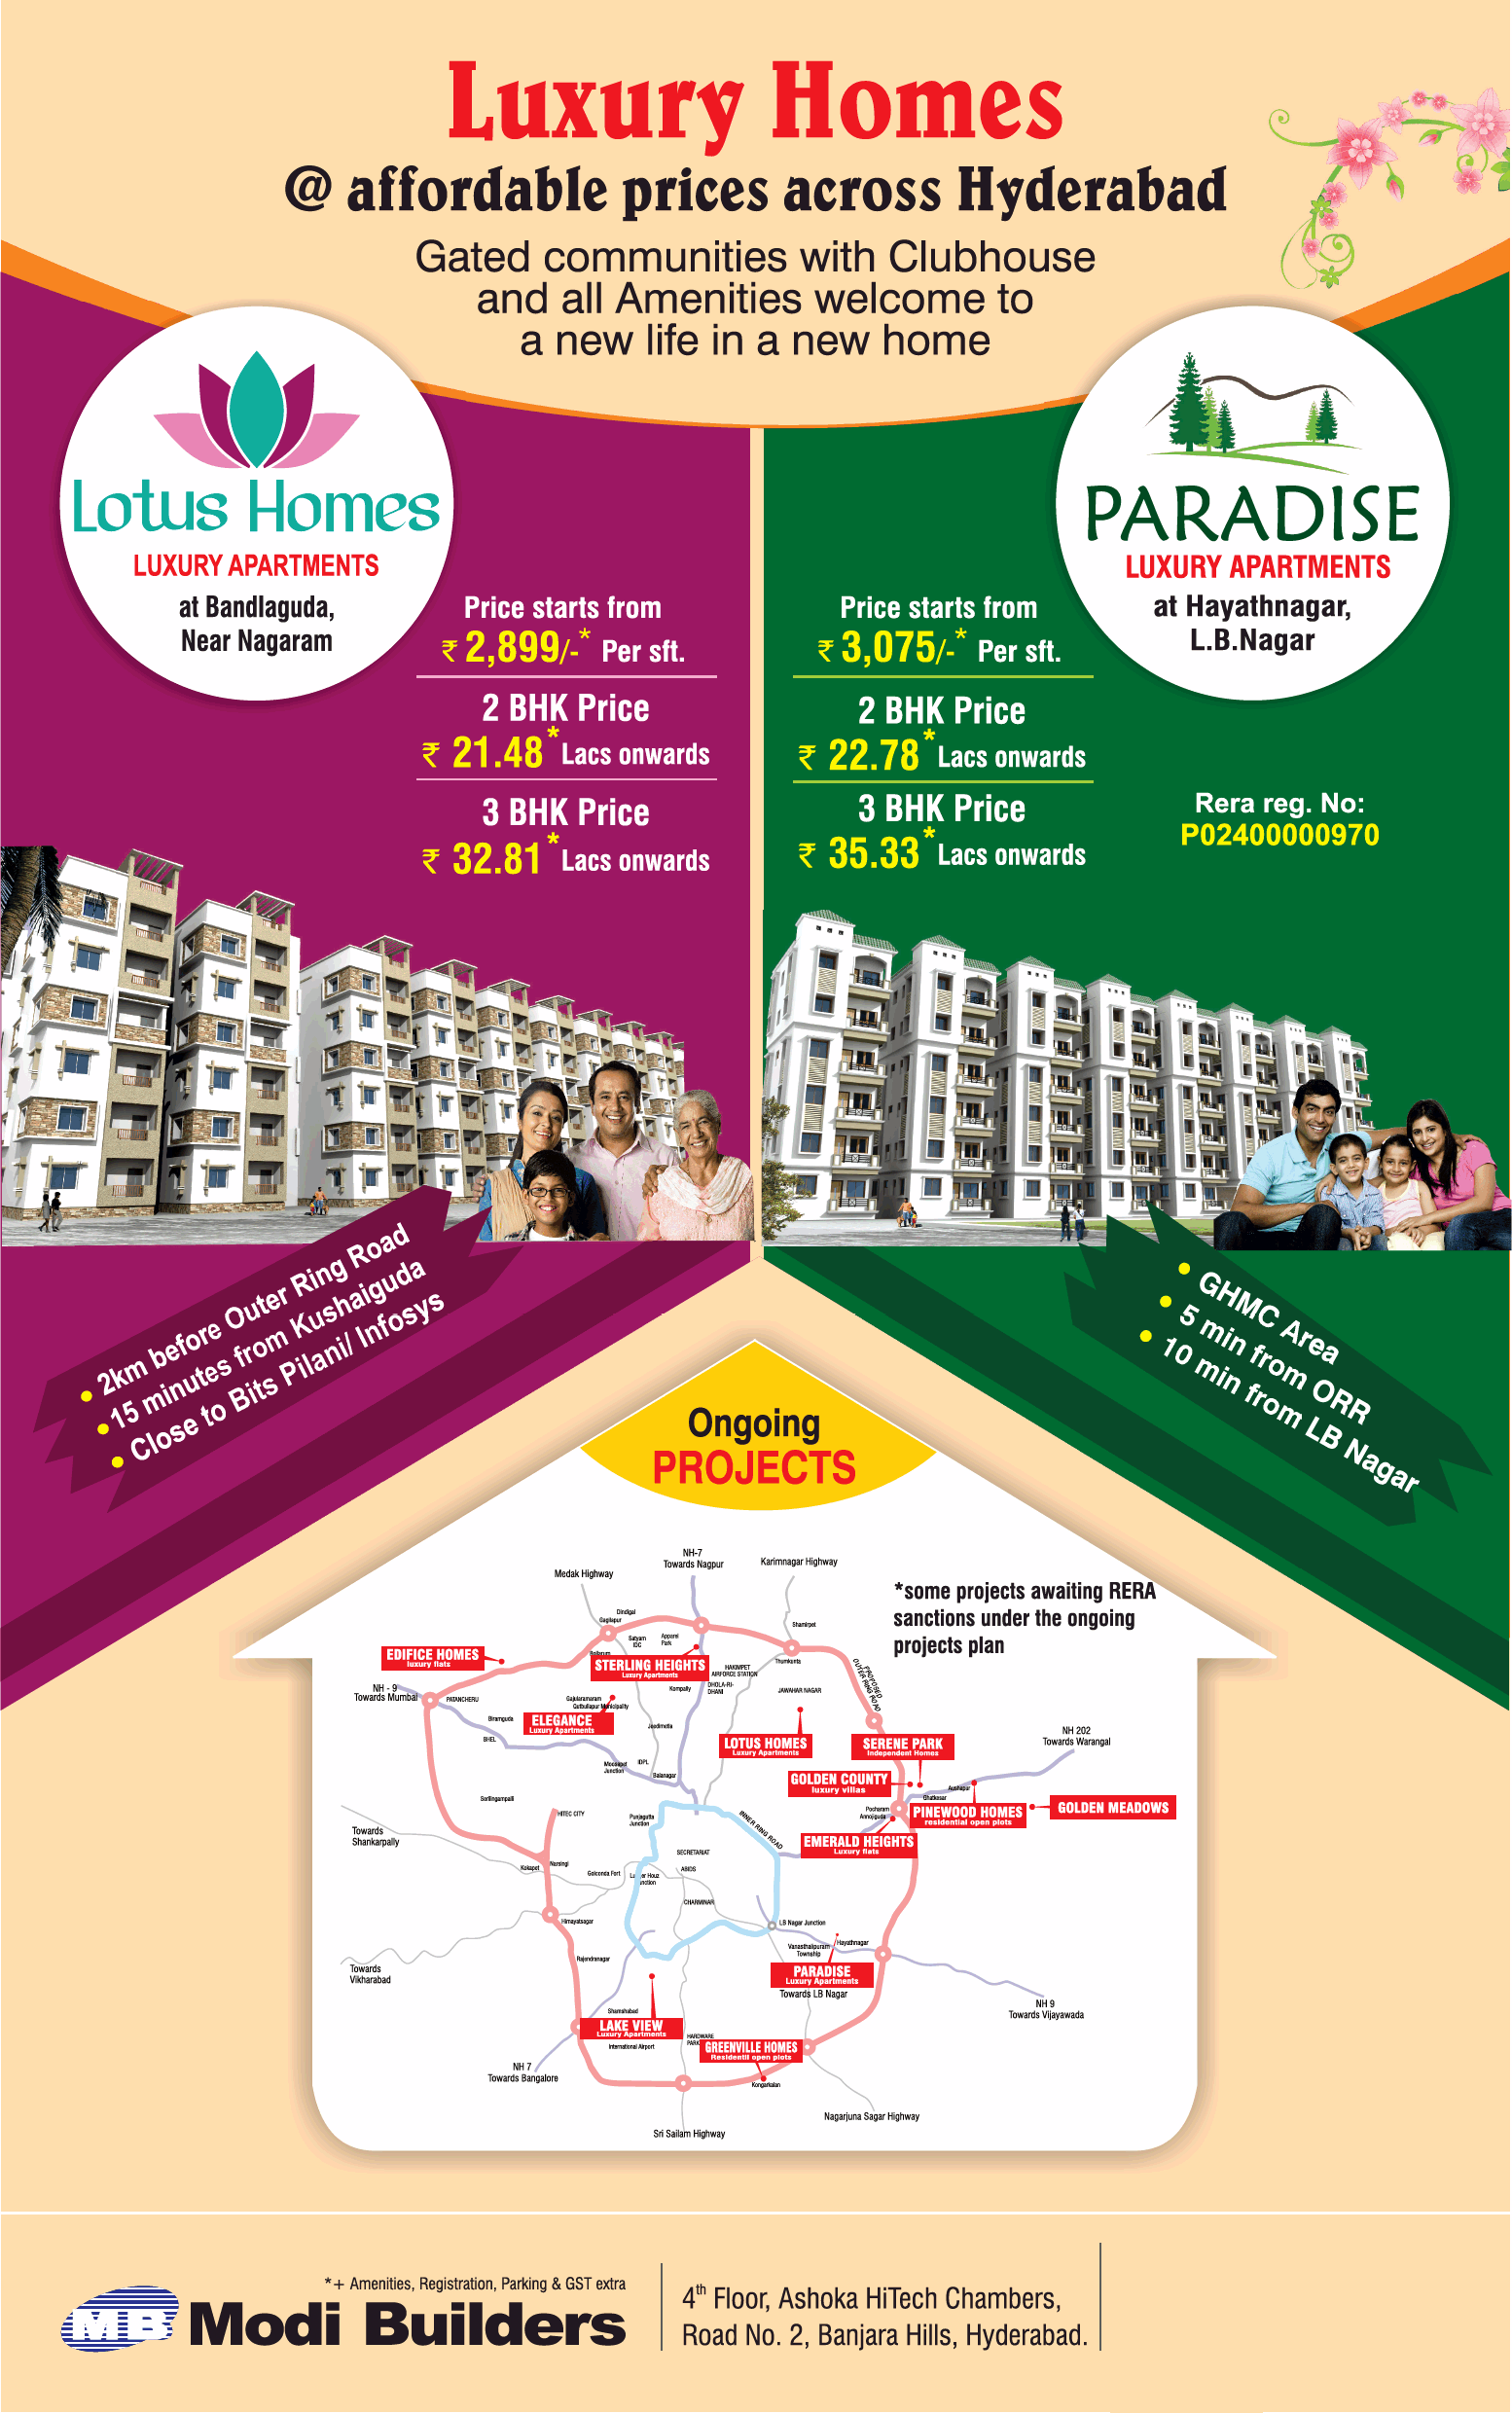 Luxury homes at affordable prices by Modi Builders, Hyderabad Update